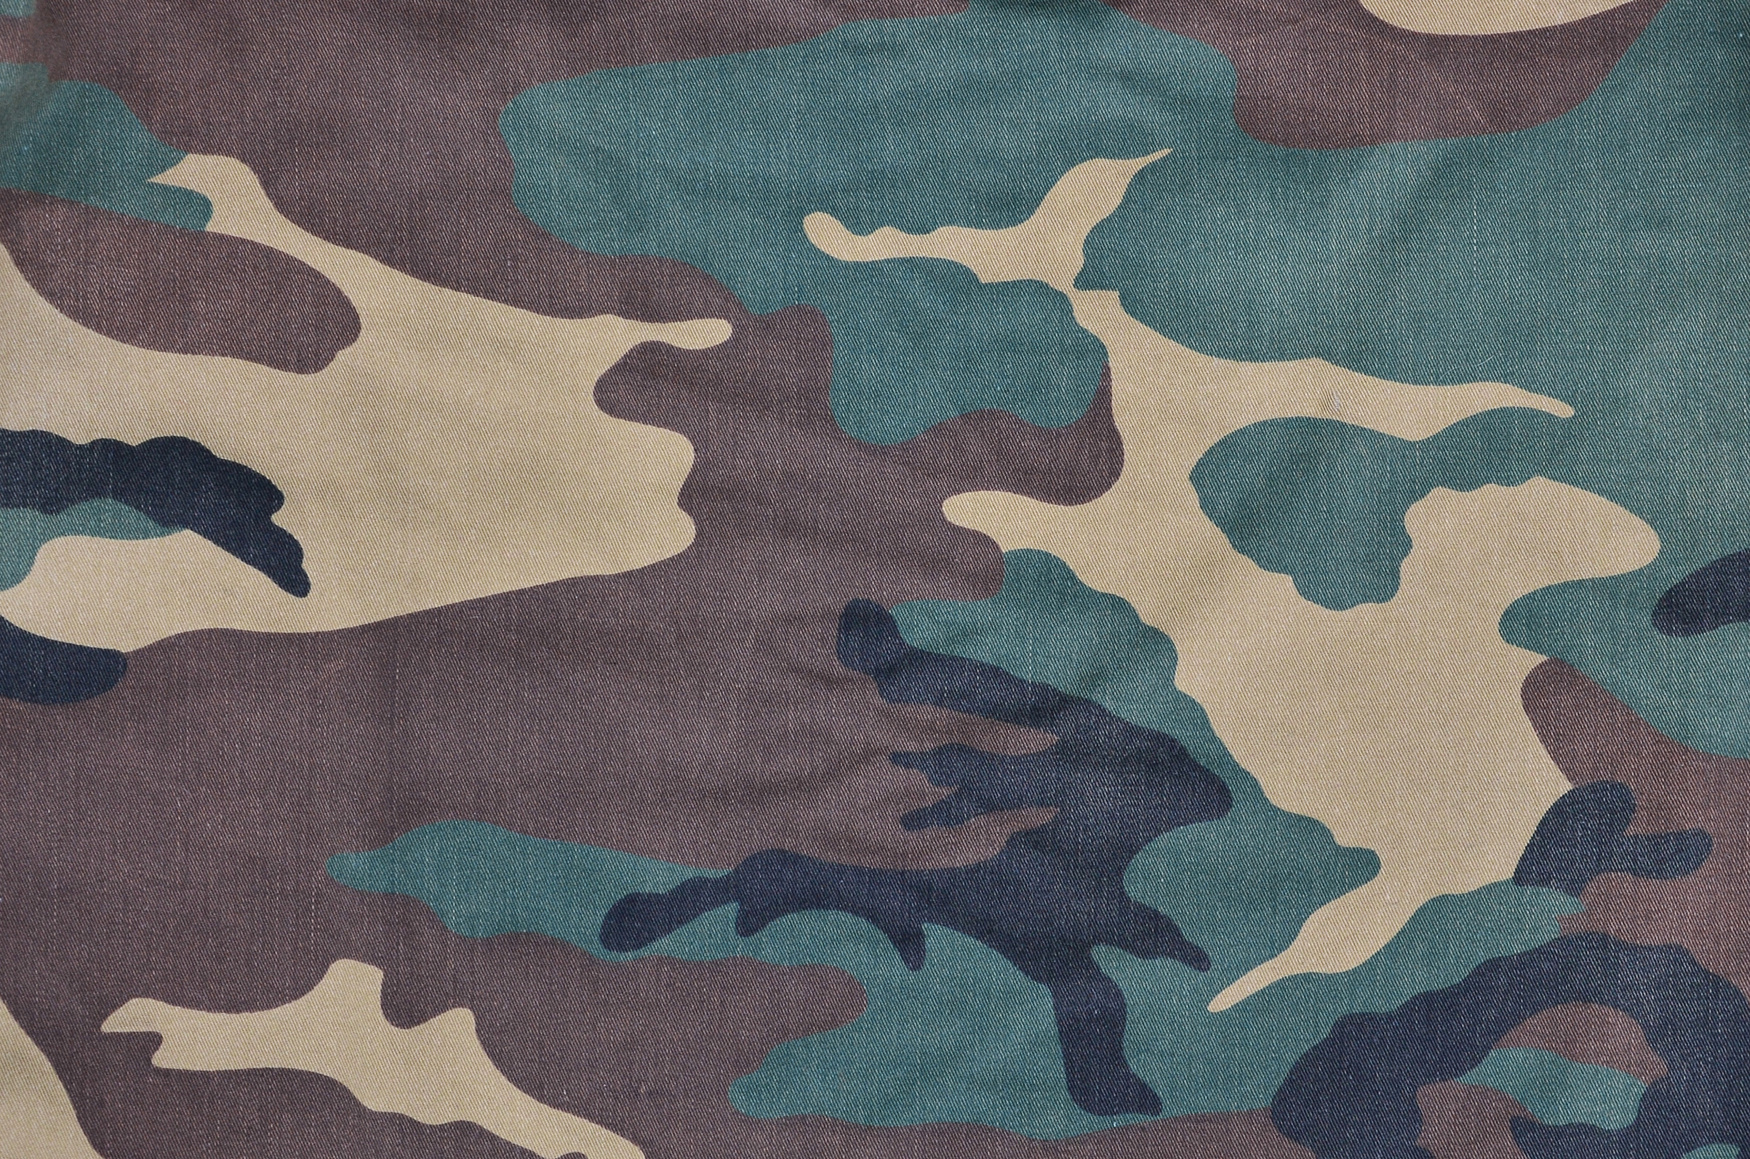 Textile Pattern of Military Camouflage Fabric